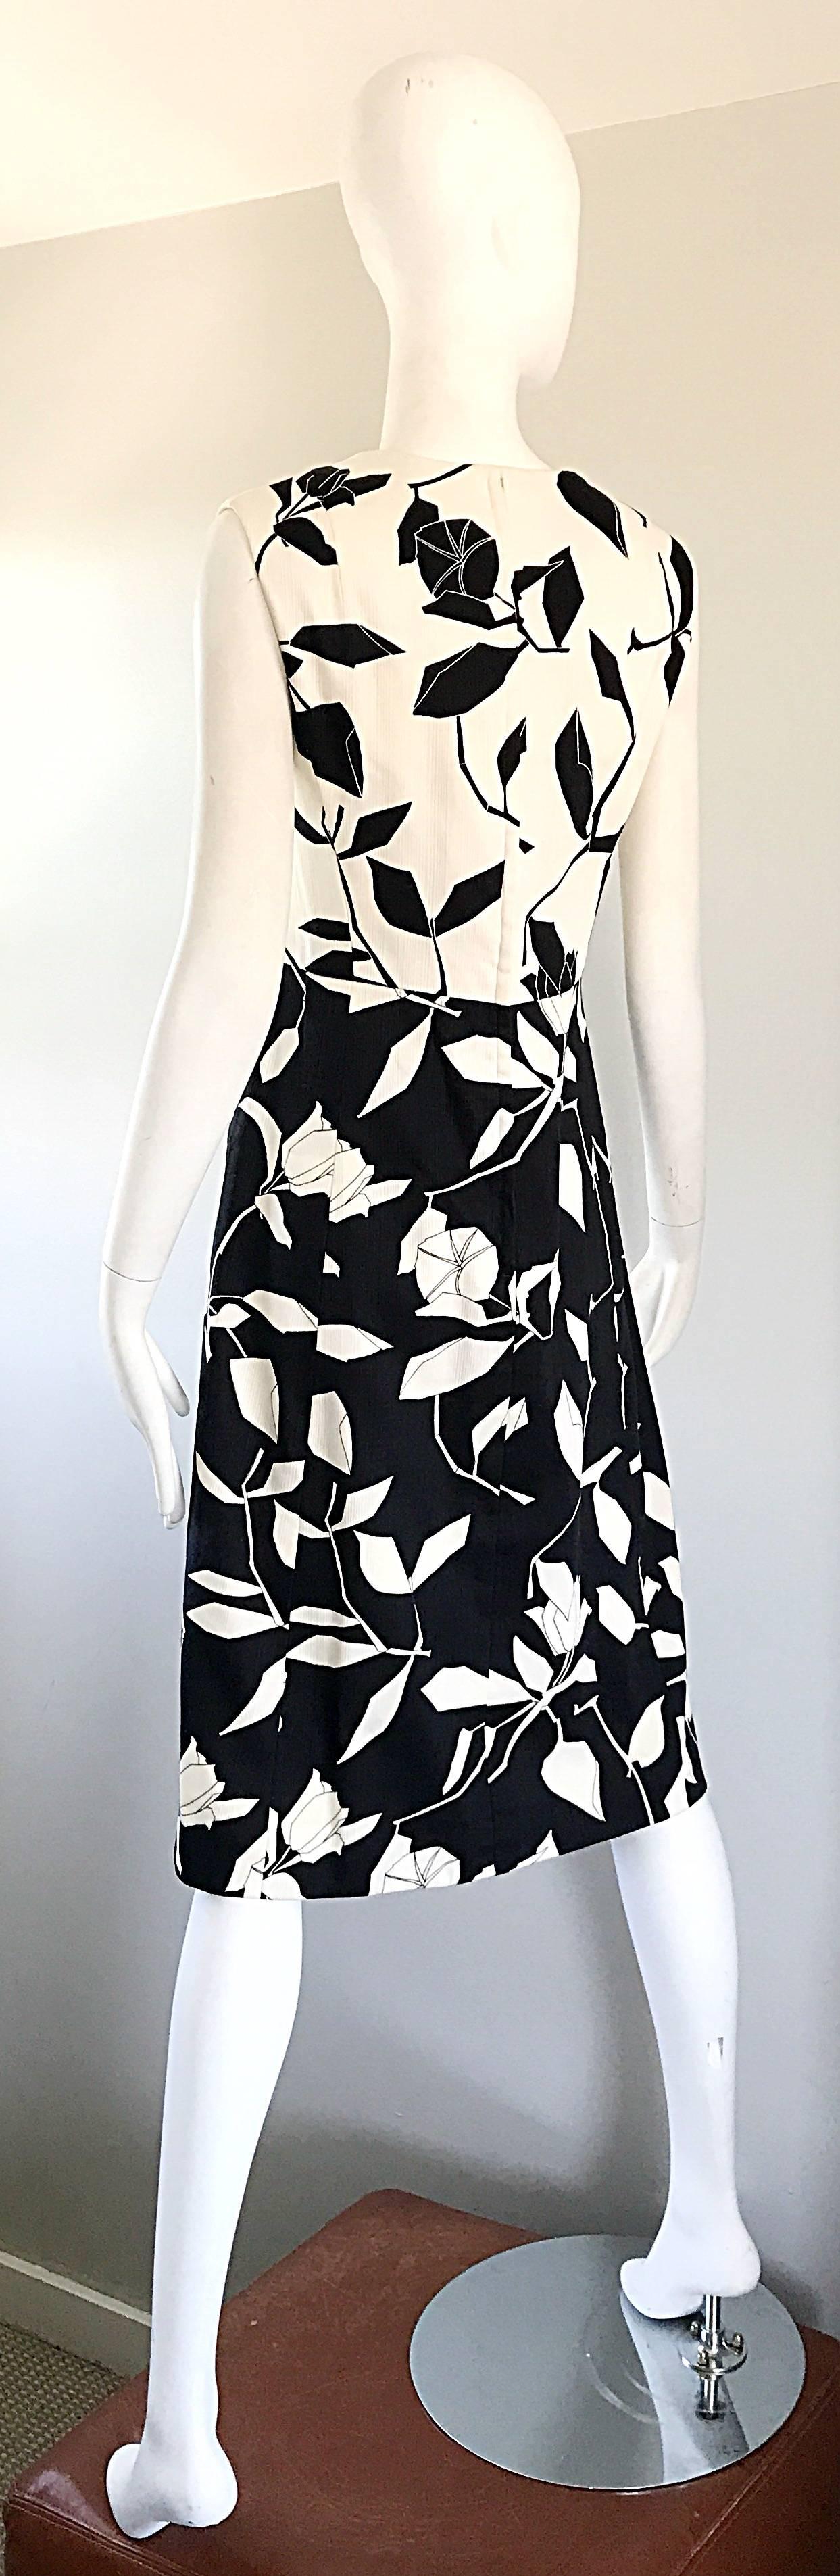 Chic 1960s Black and White Abstract Floral A Line Sleeveless Vintage 60s Dress  2